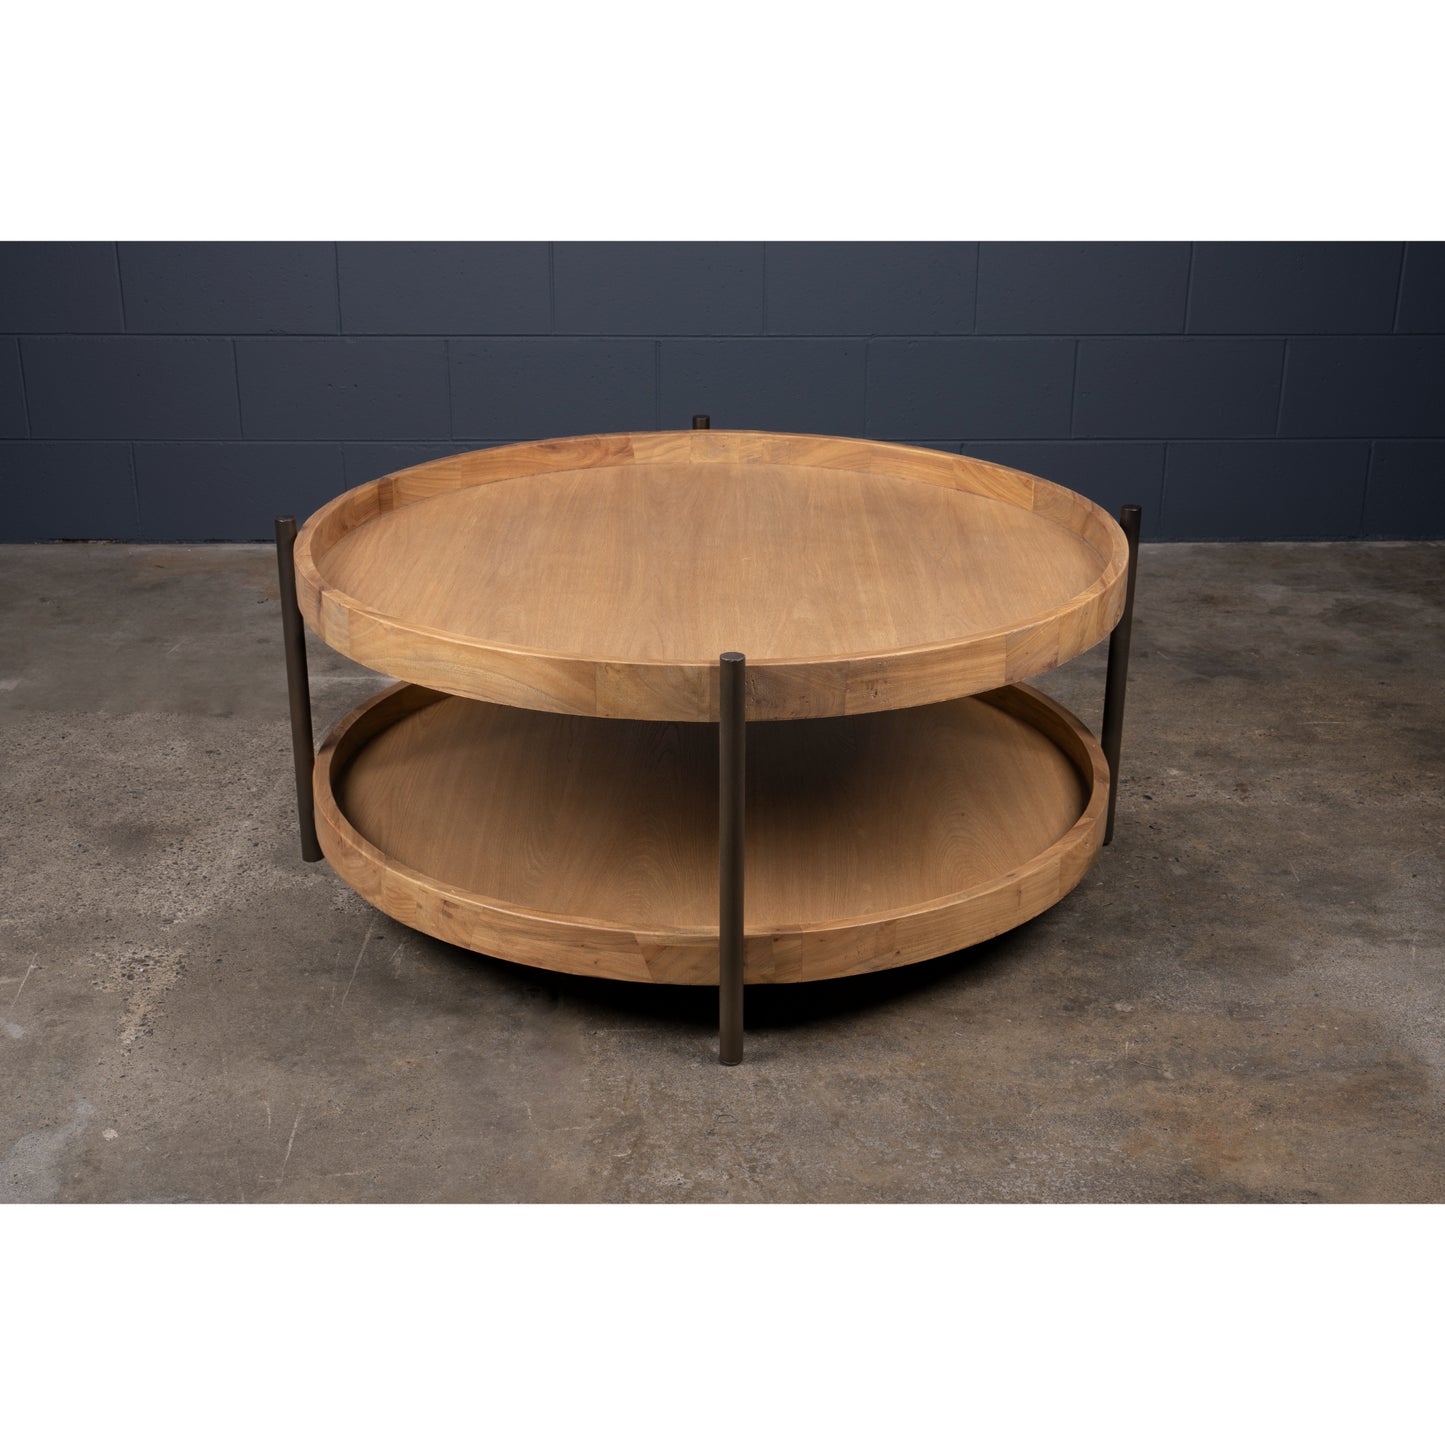 Baxter Round Coffee table